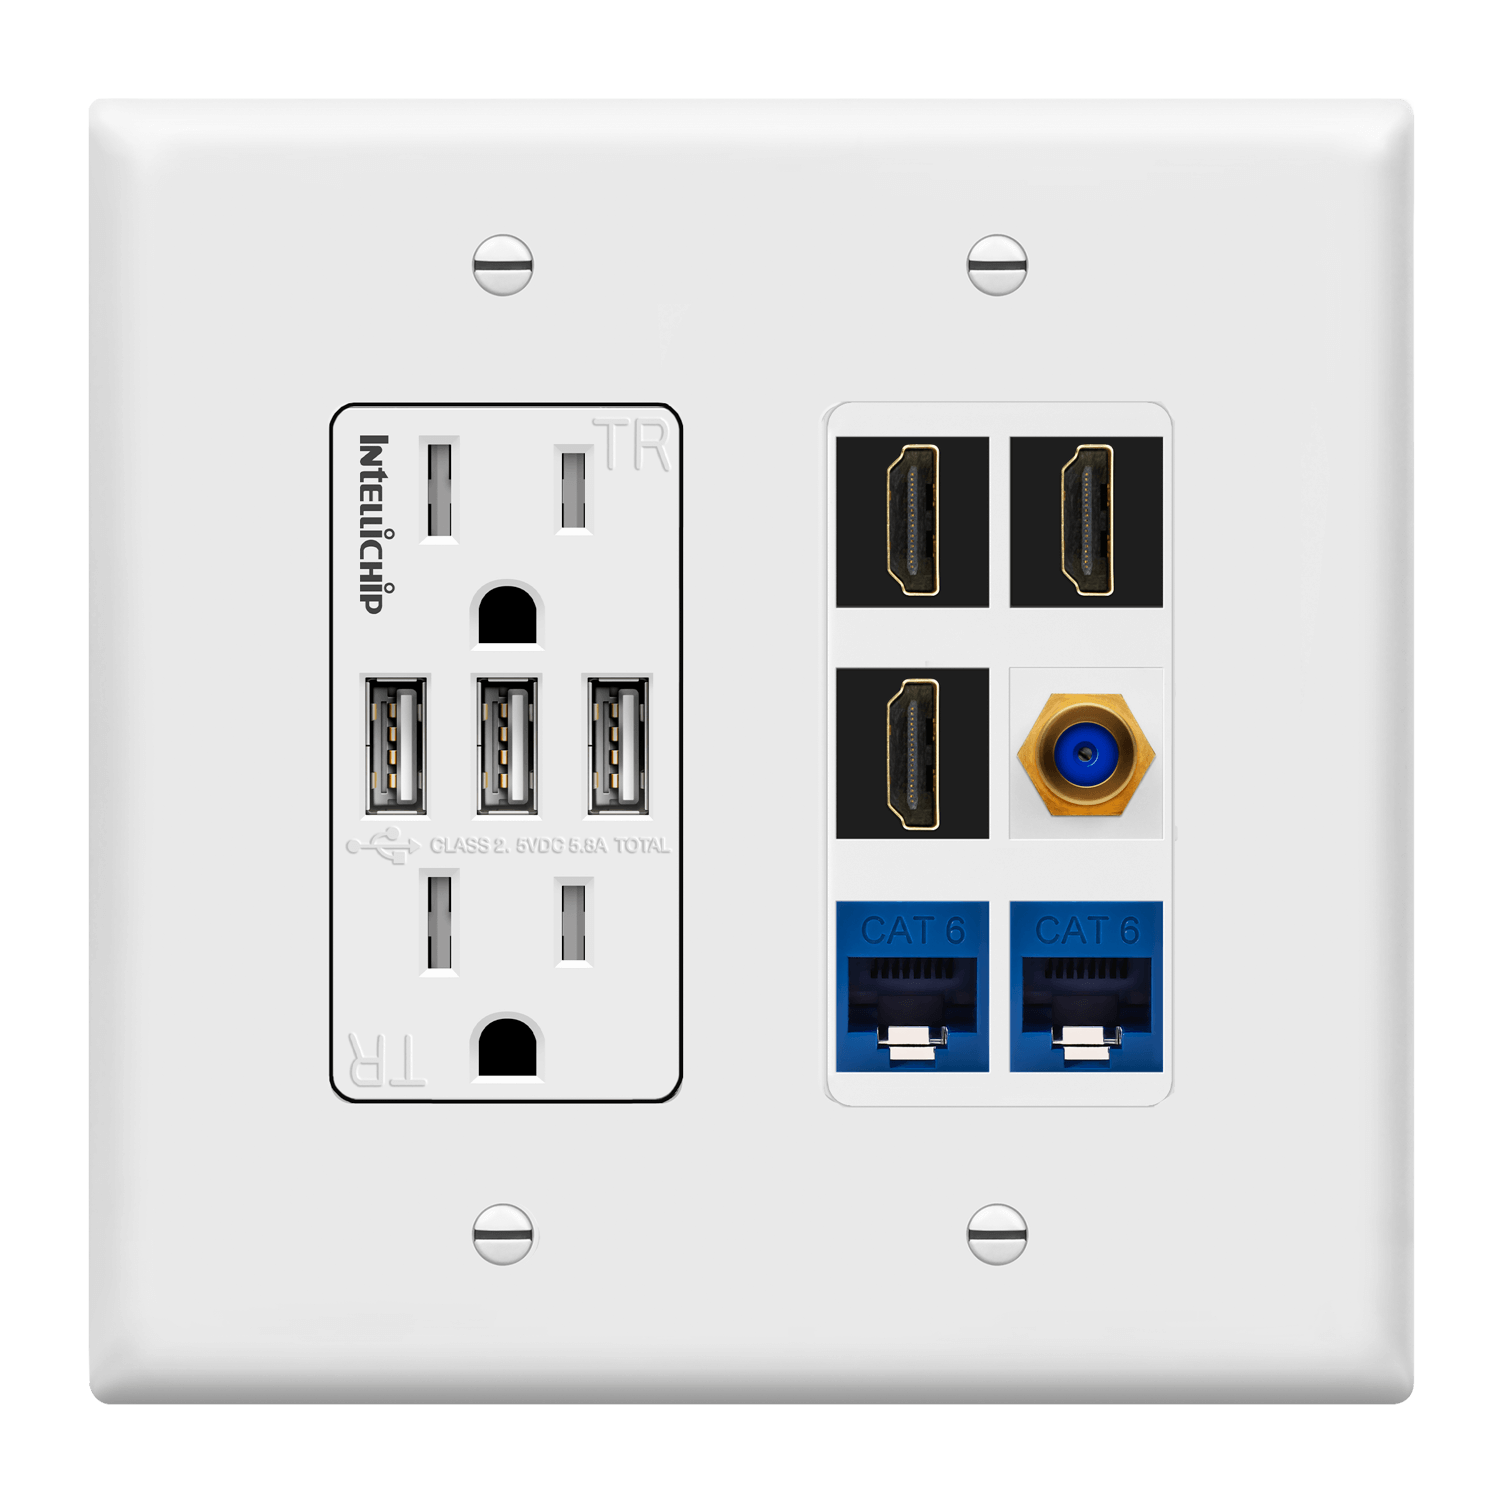 Double Gang Datacomm Bundle with 5.8A USB Wall Outlet, 6-Port Keystone Jack Insert